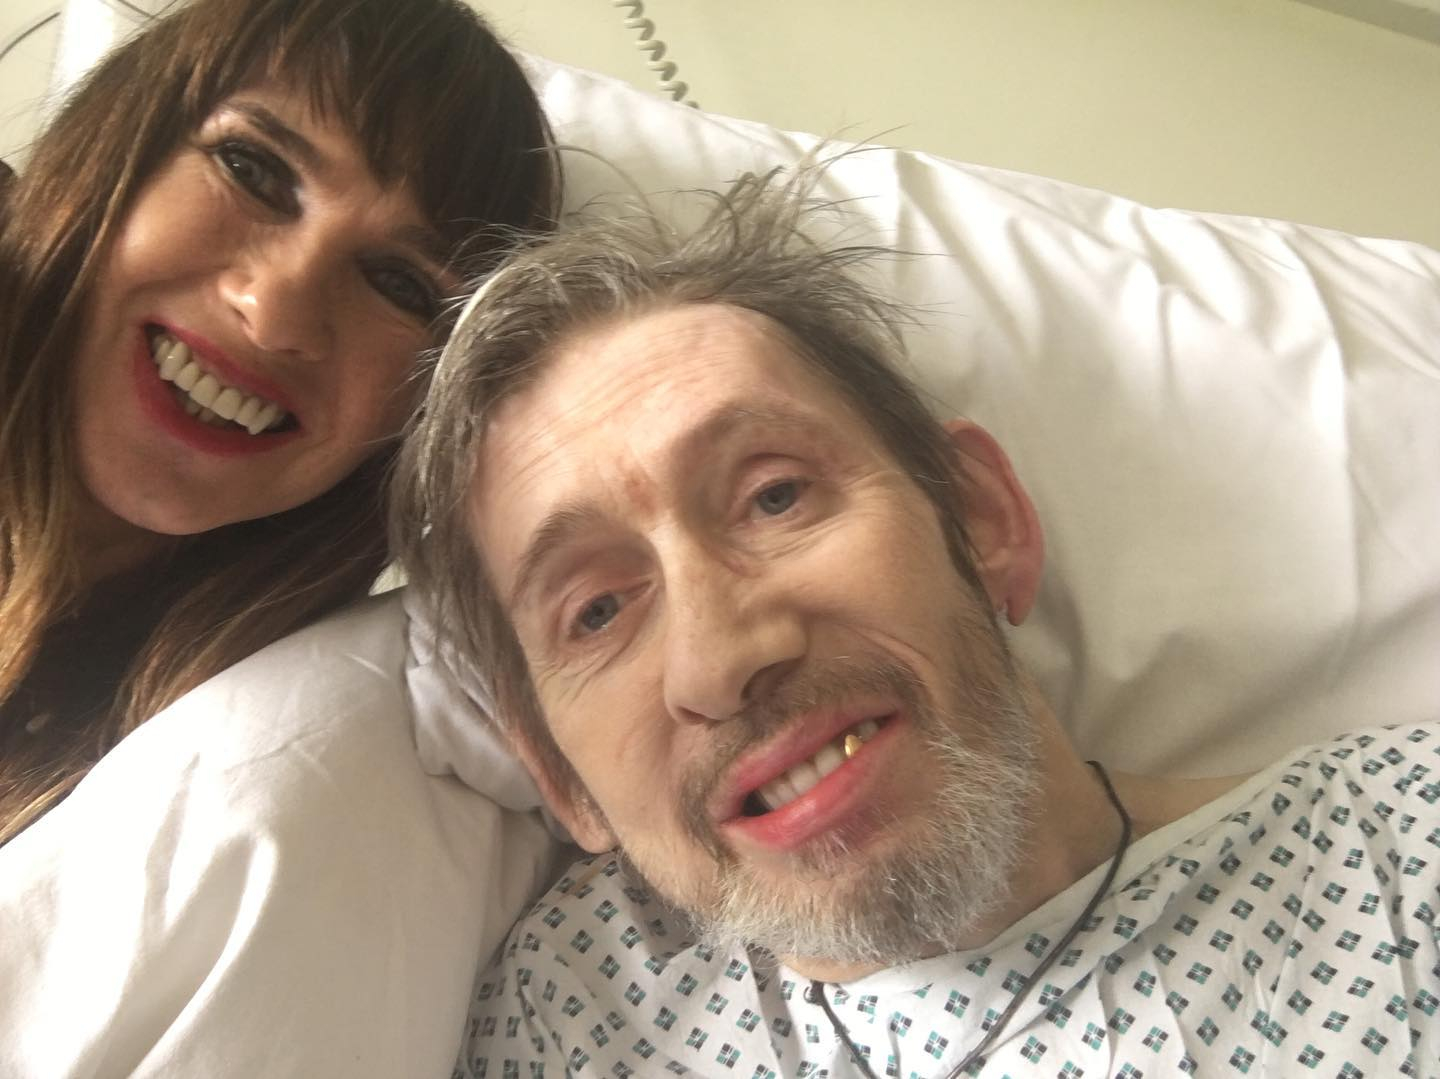 The Pogues icon, with wife Victoria Mary, has been hospitalised several times for tough condition